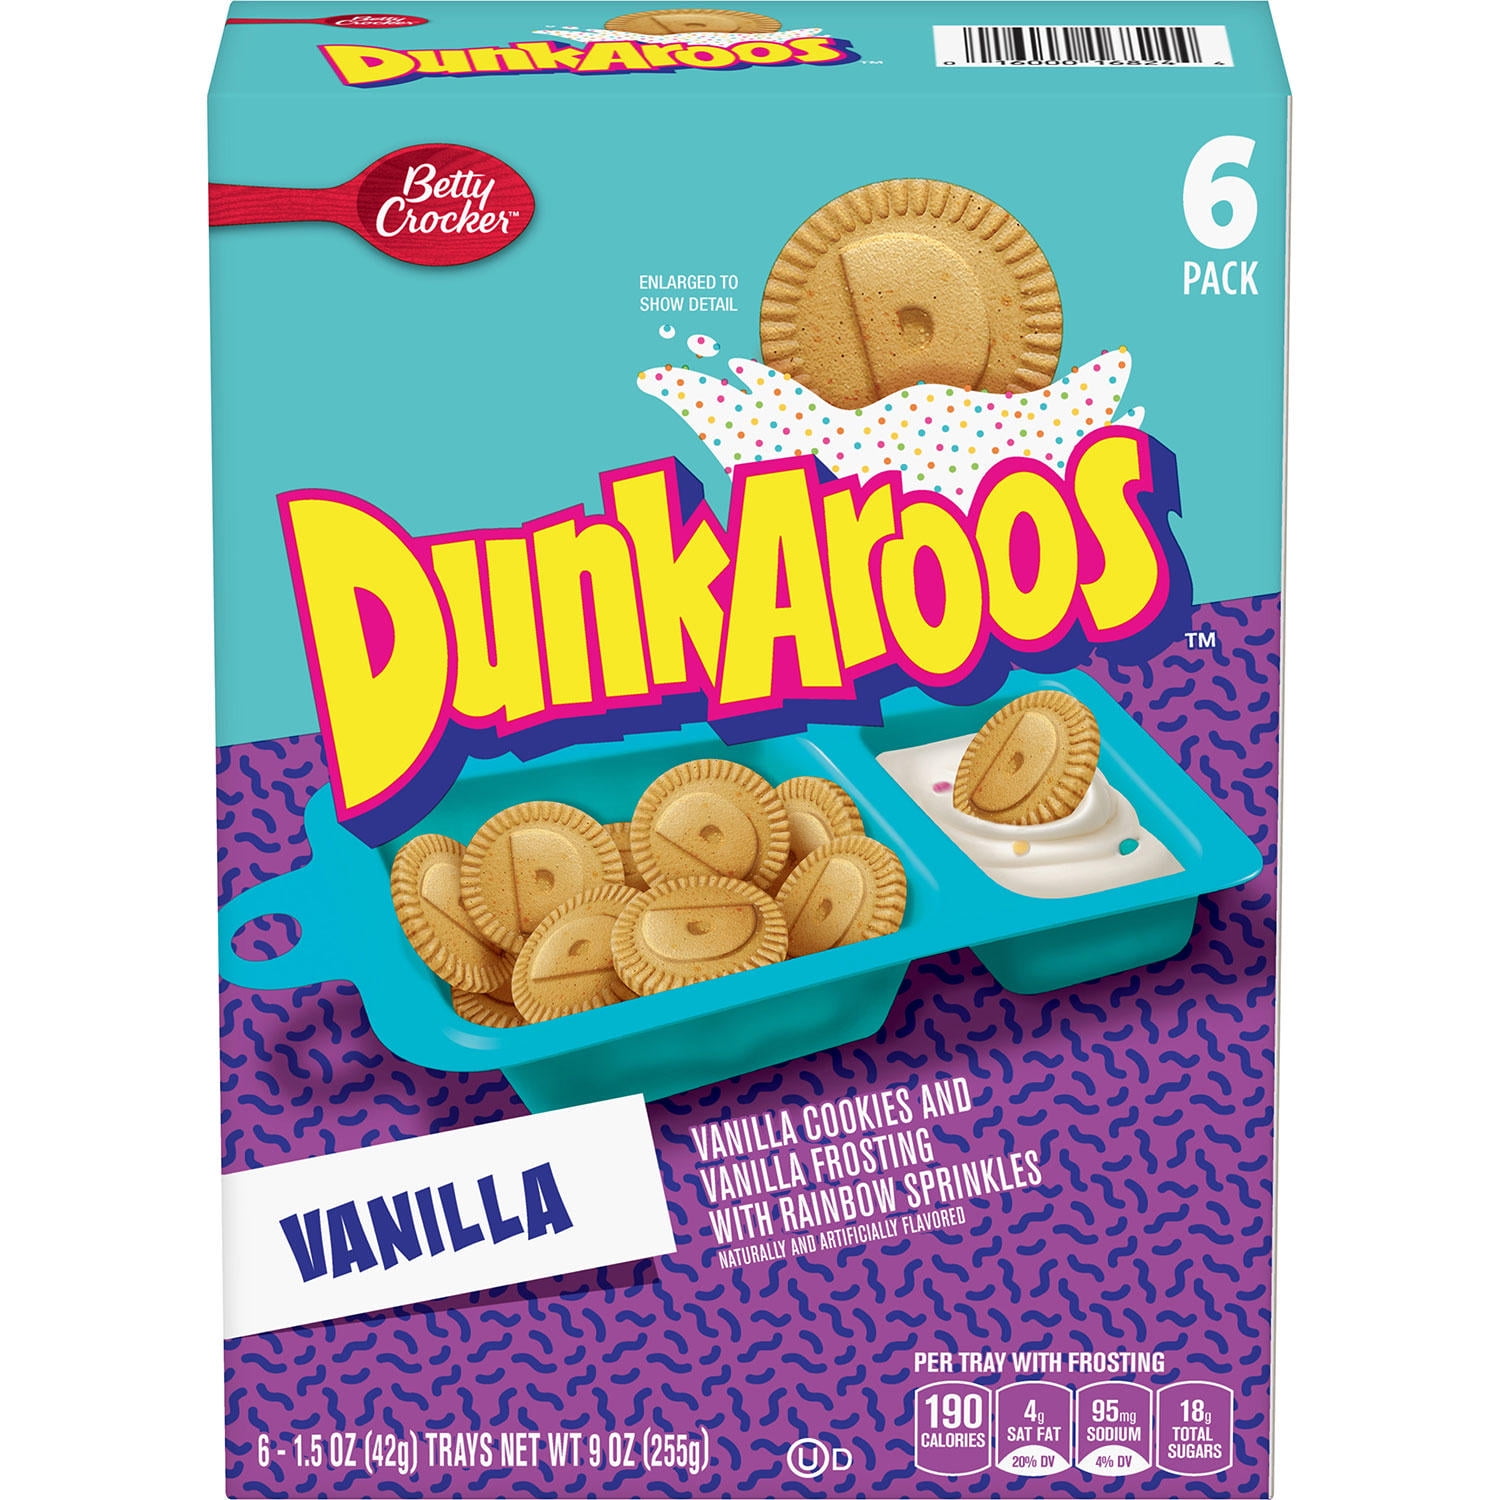 Dunkaroos 3 Pack 1990s Nostalgia Snack In Vanilla Cookies Frosting Ships Fast 